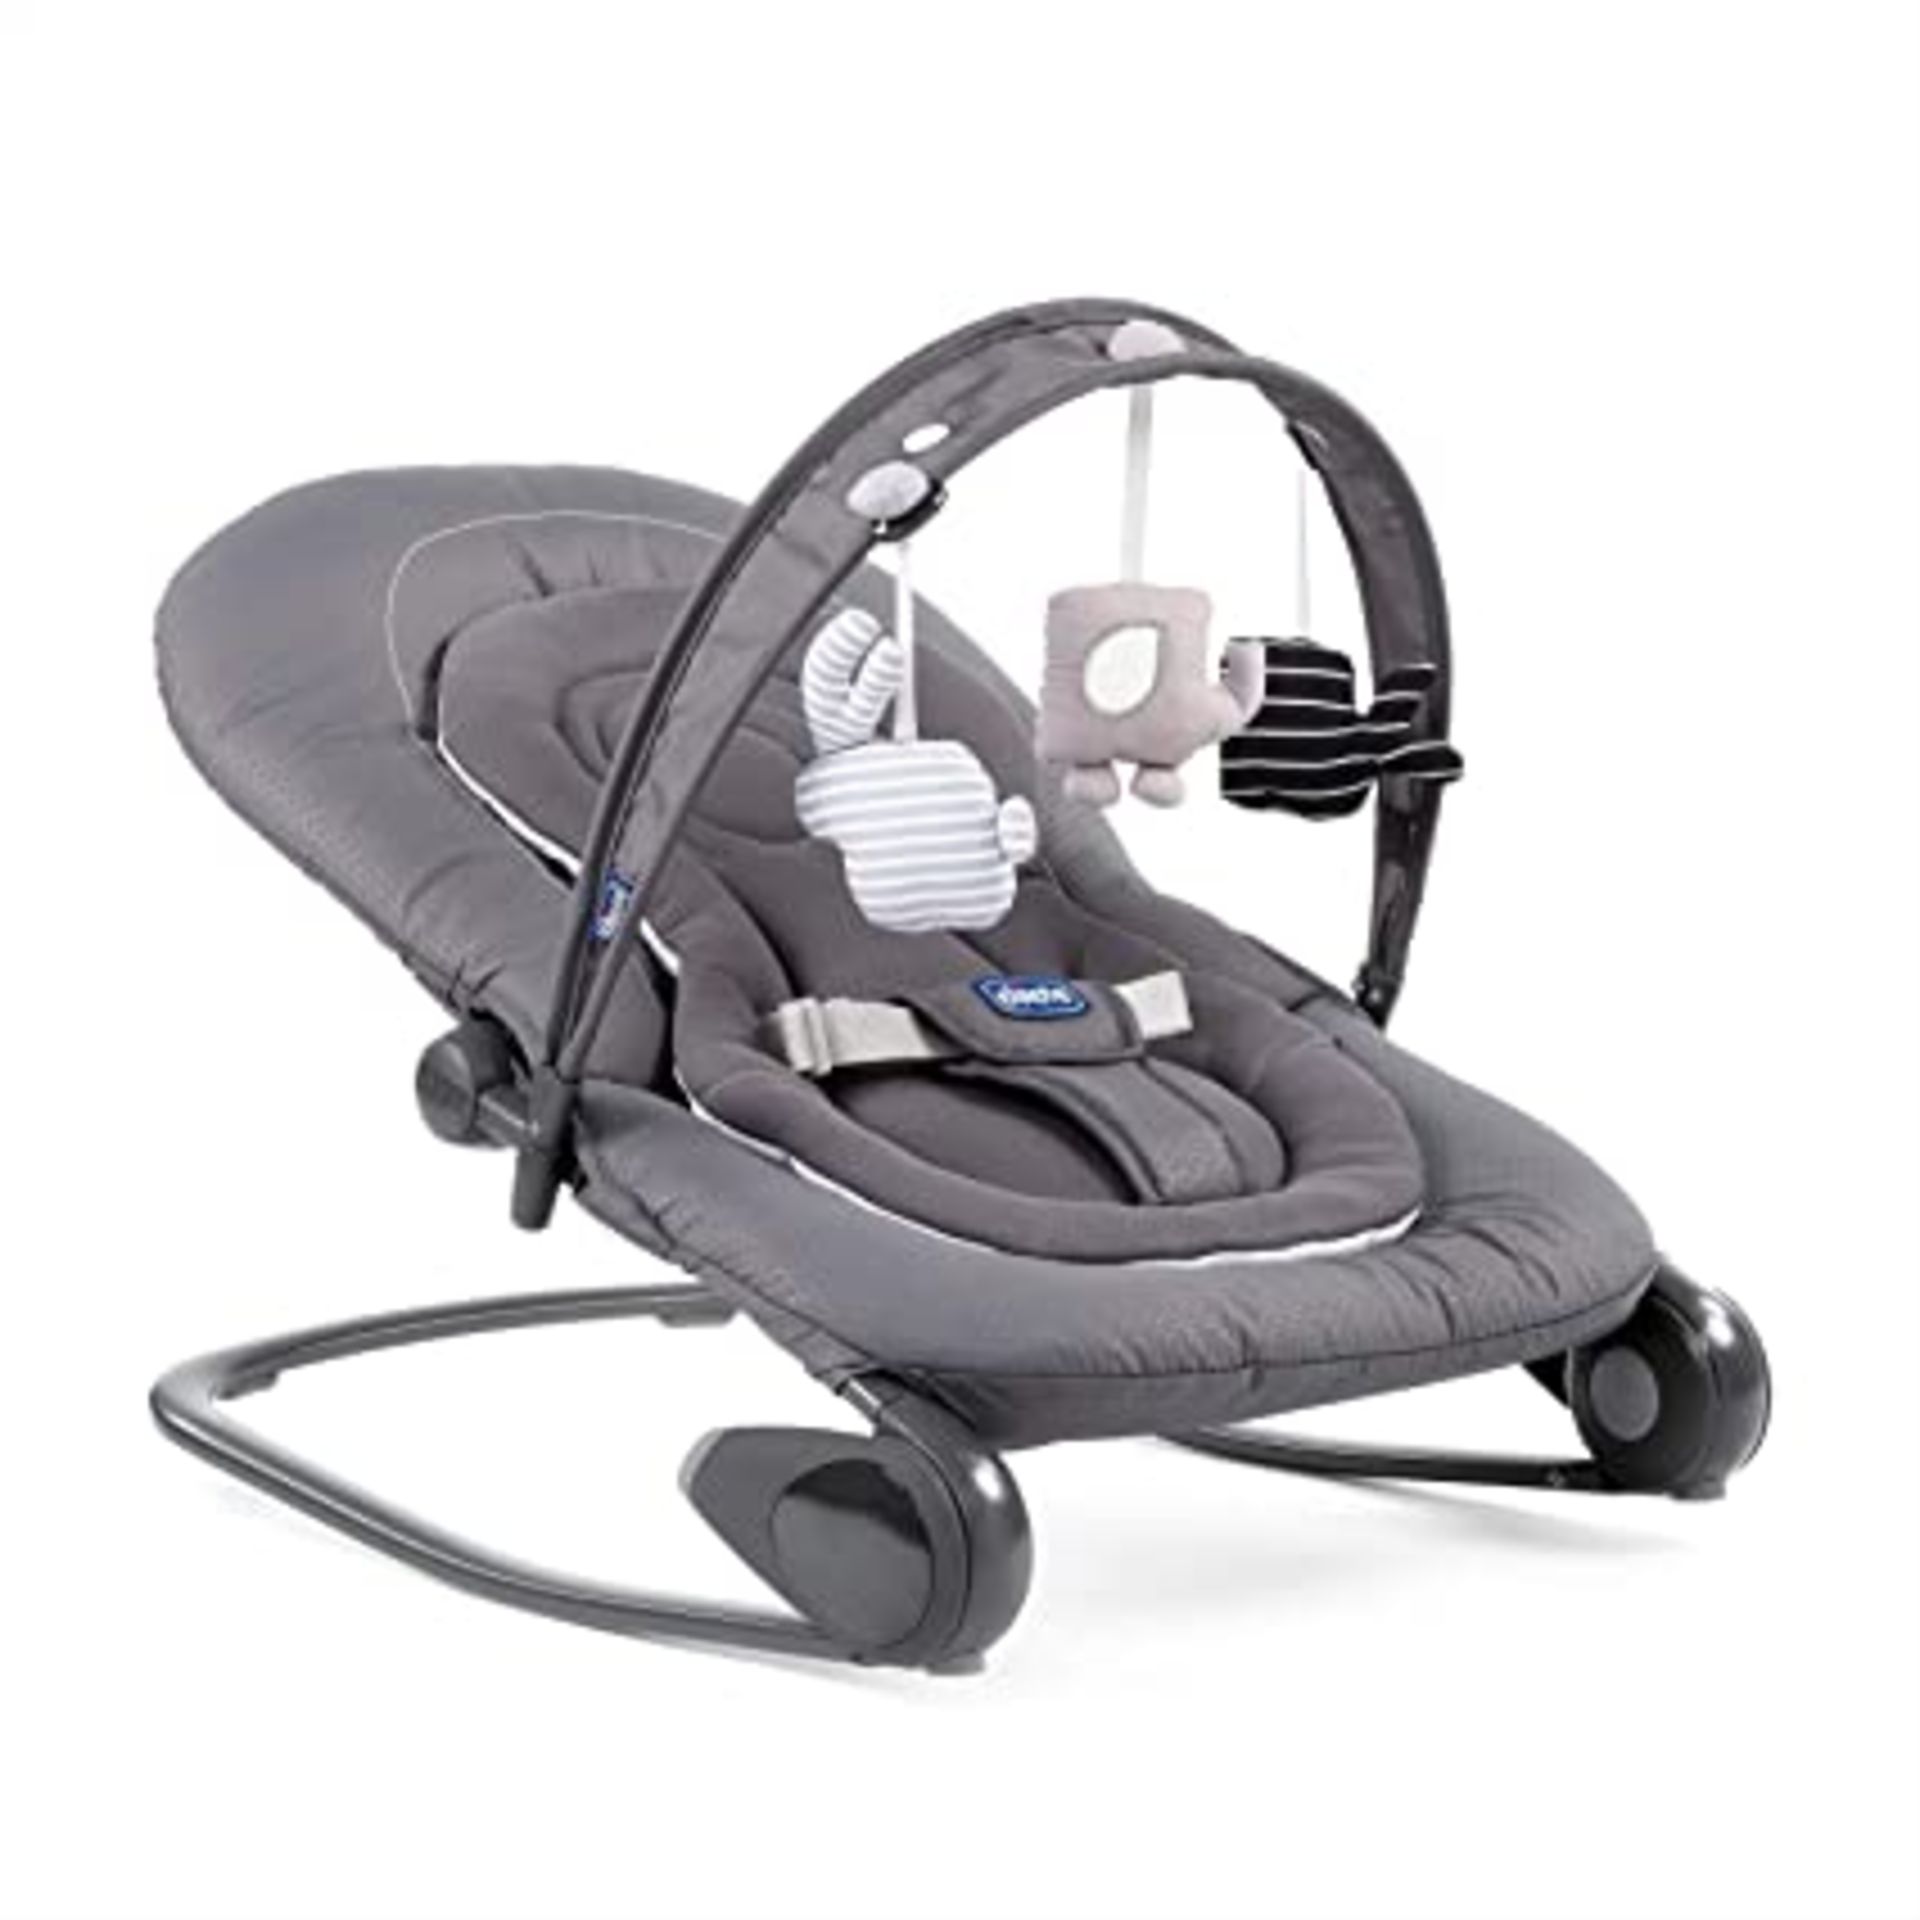 Boxed Chicco Hoopla Ages 0 Months Plus Baby Bouncer RRP £60 (32032101) (Pictures Are For